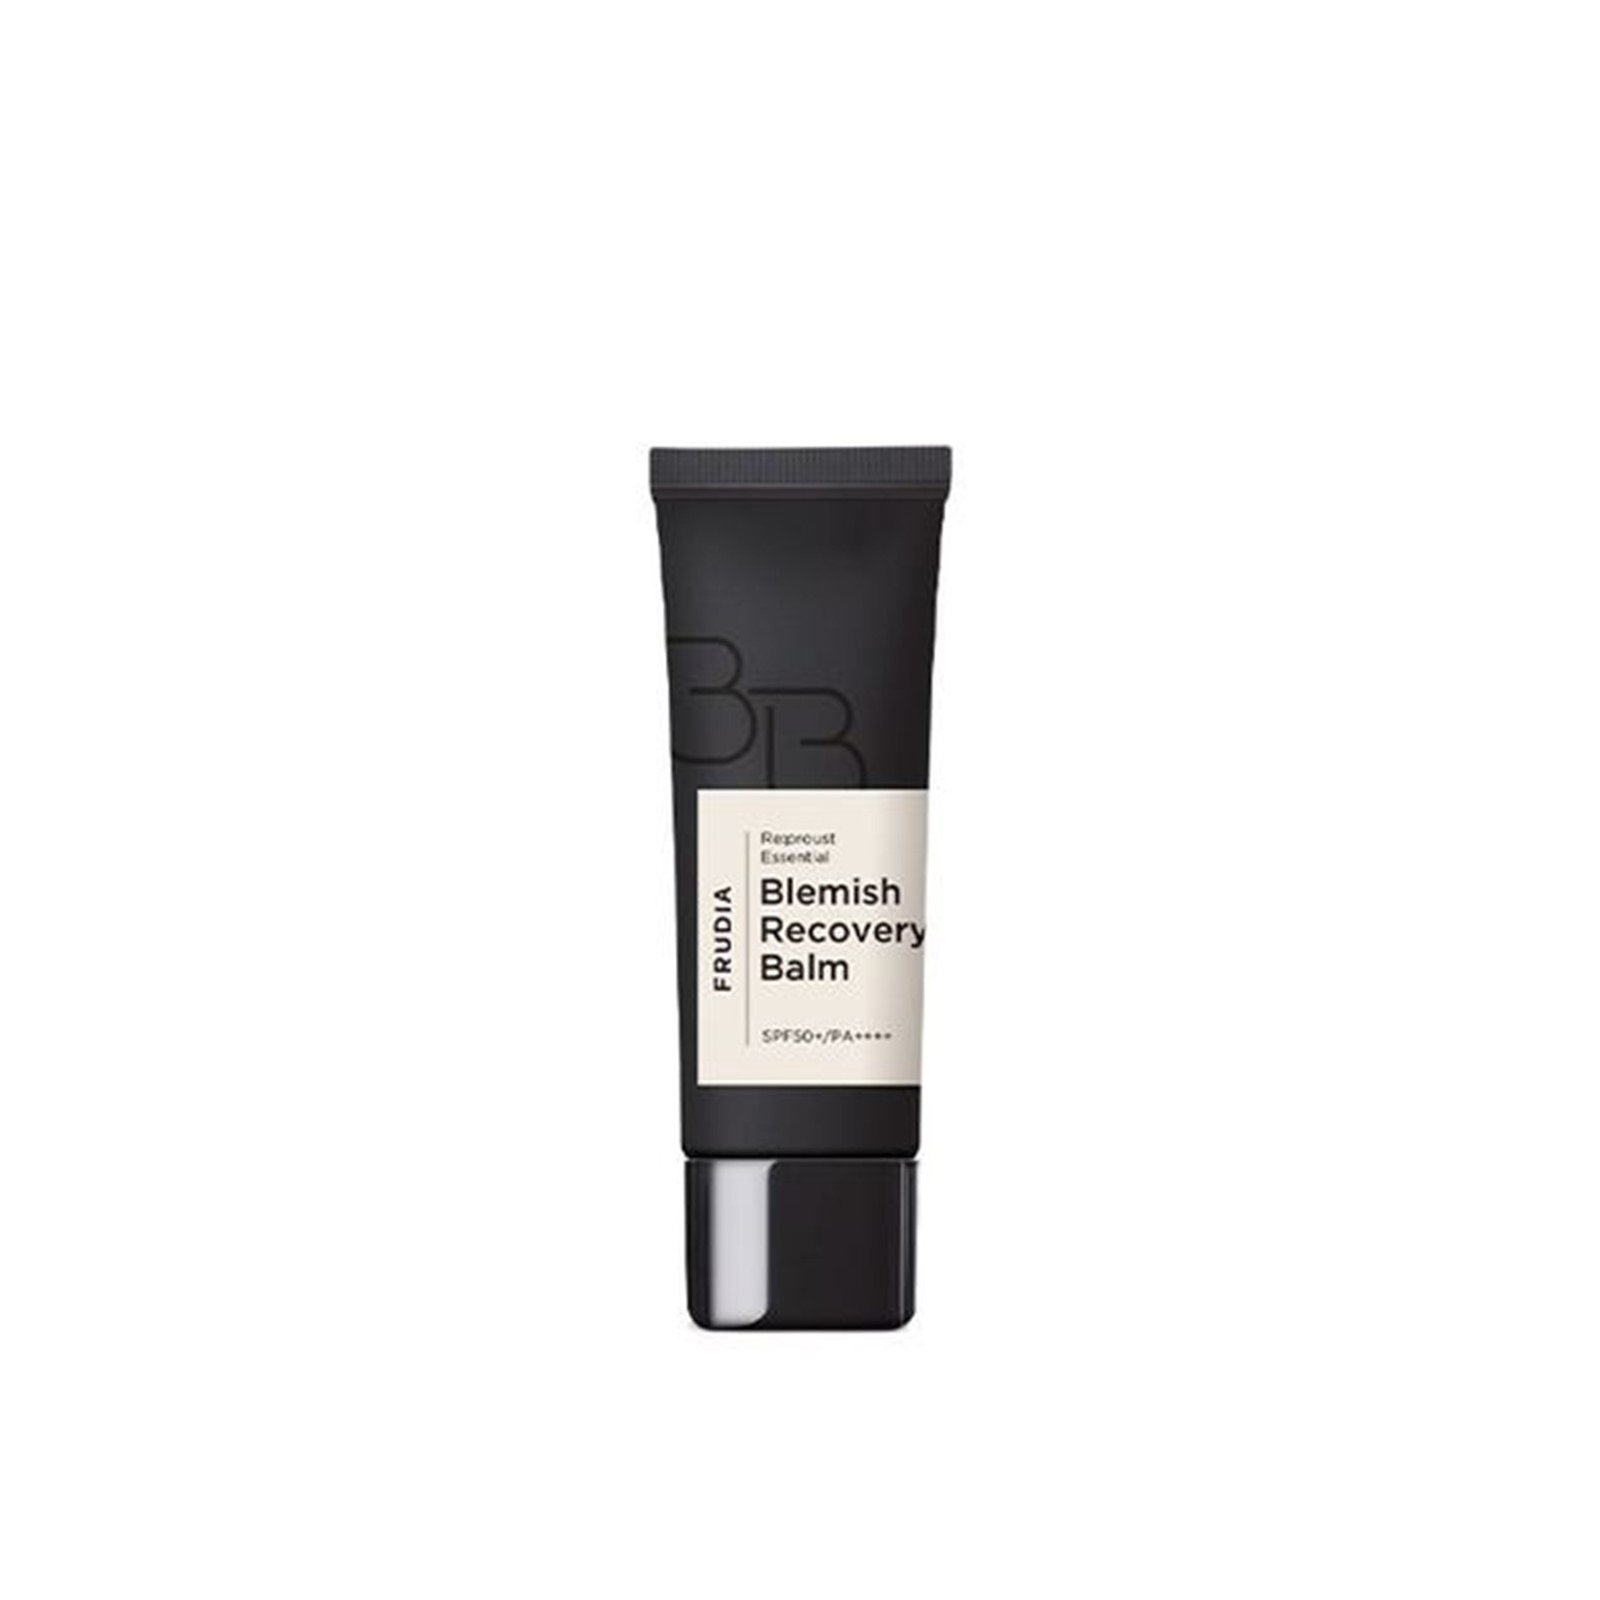 Frudia Re:Proust Essential Blemish Recovery Balm SPF50+ 40g